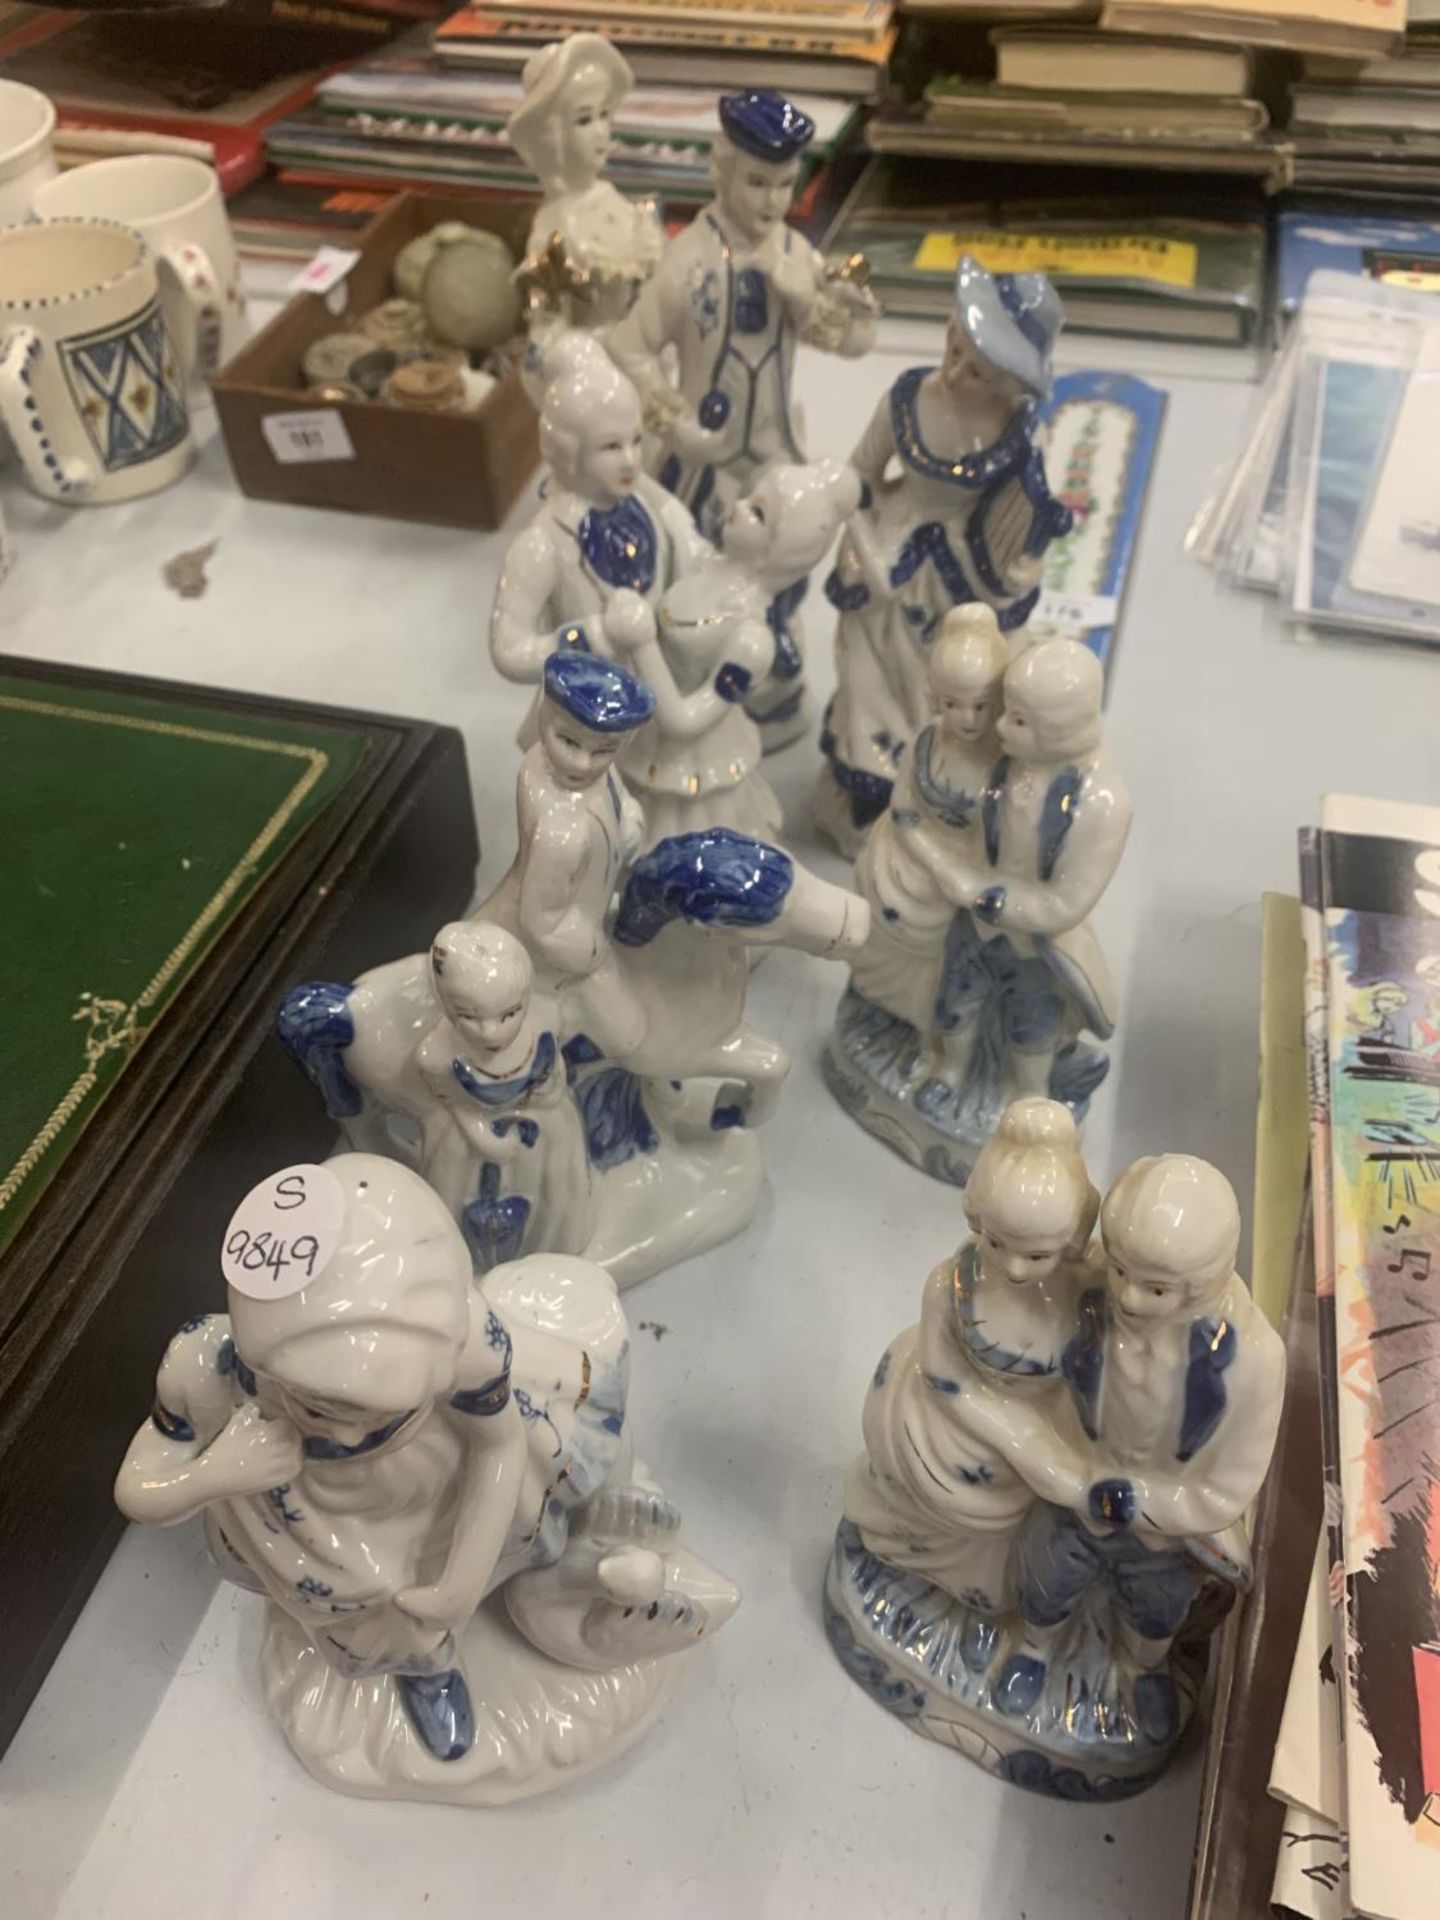 EIGHT CERAMIC FIGURE GROUPS IN THE STAFFORDSHIRE STYLE